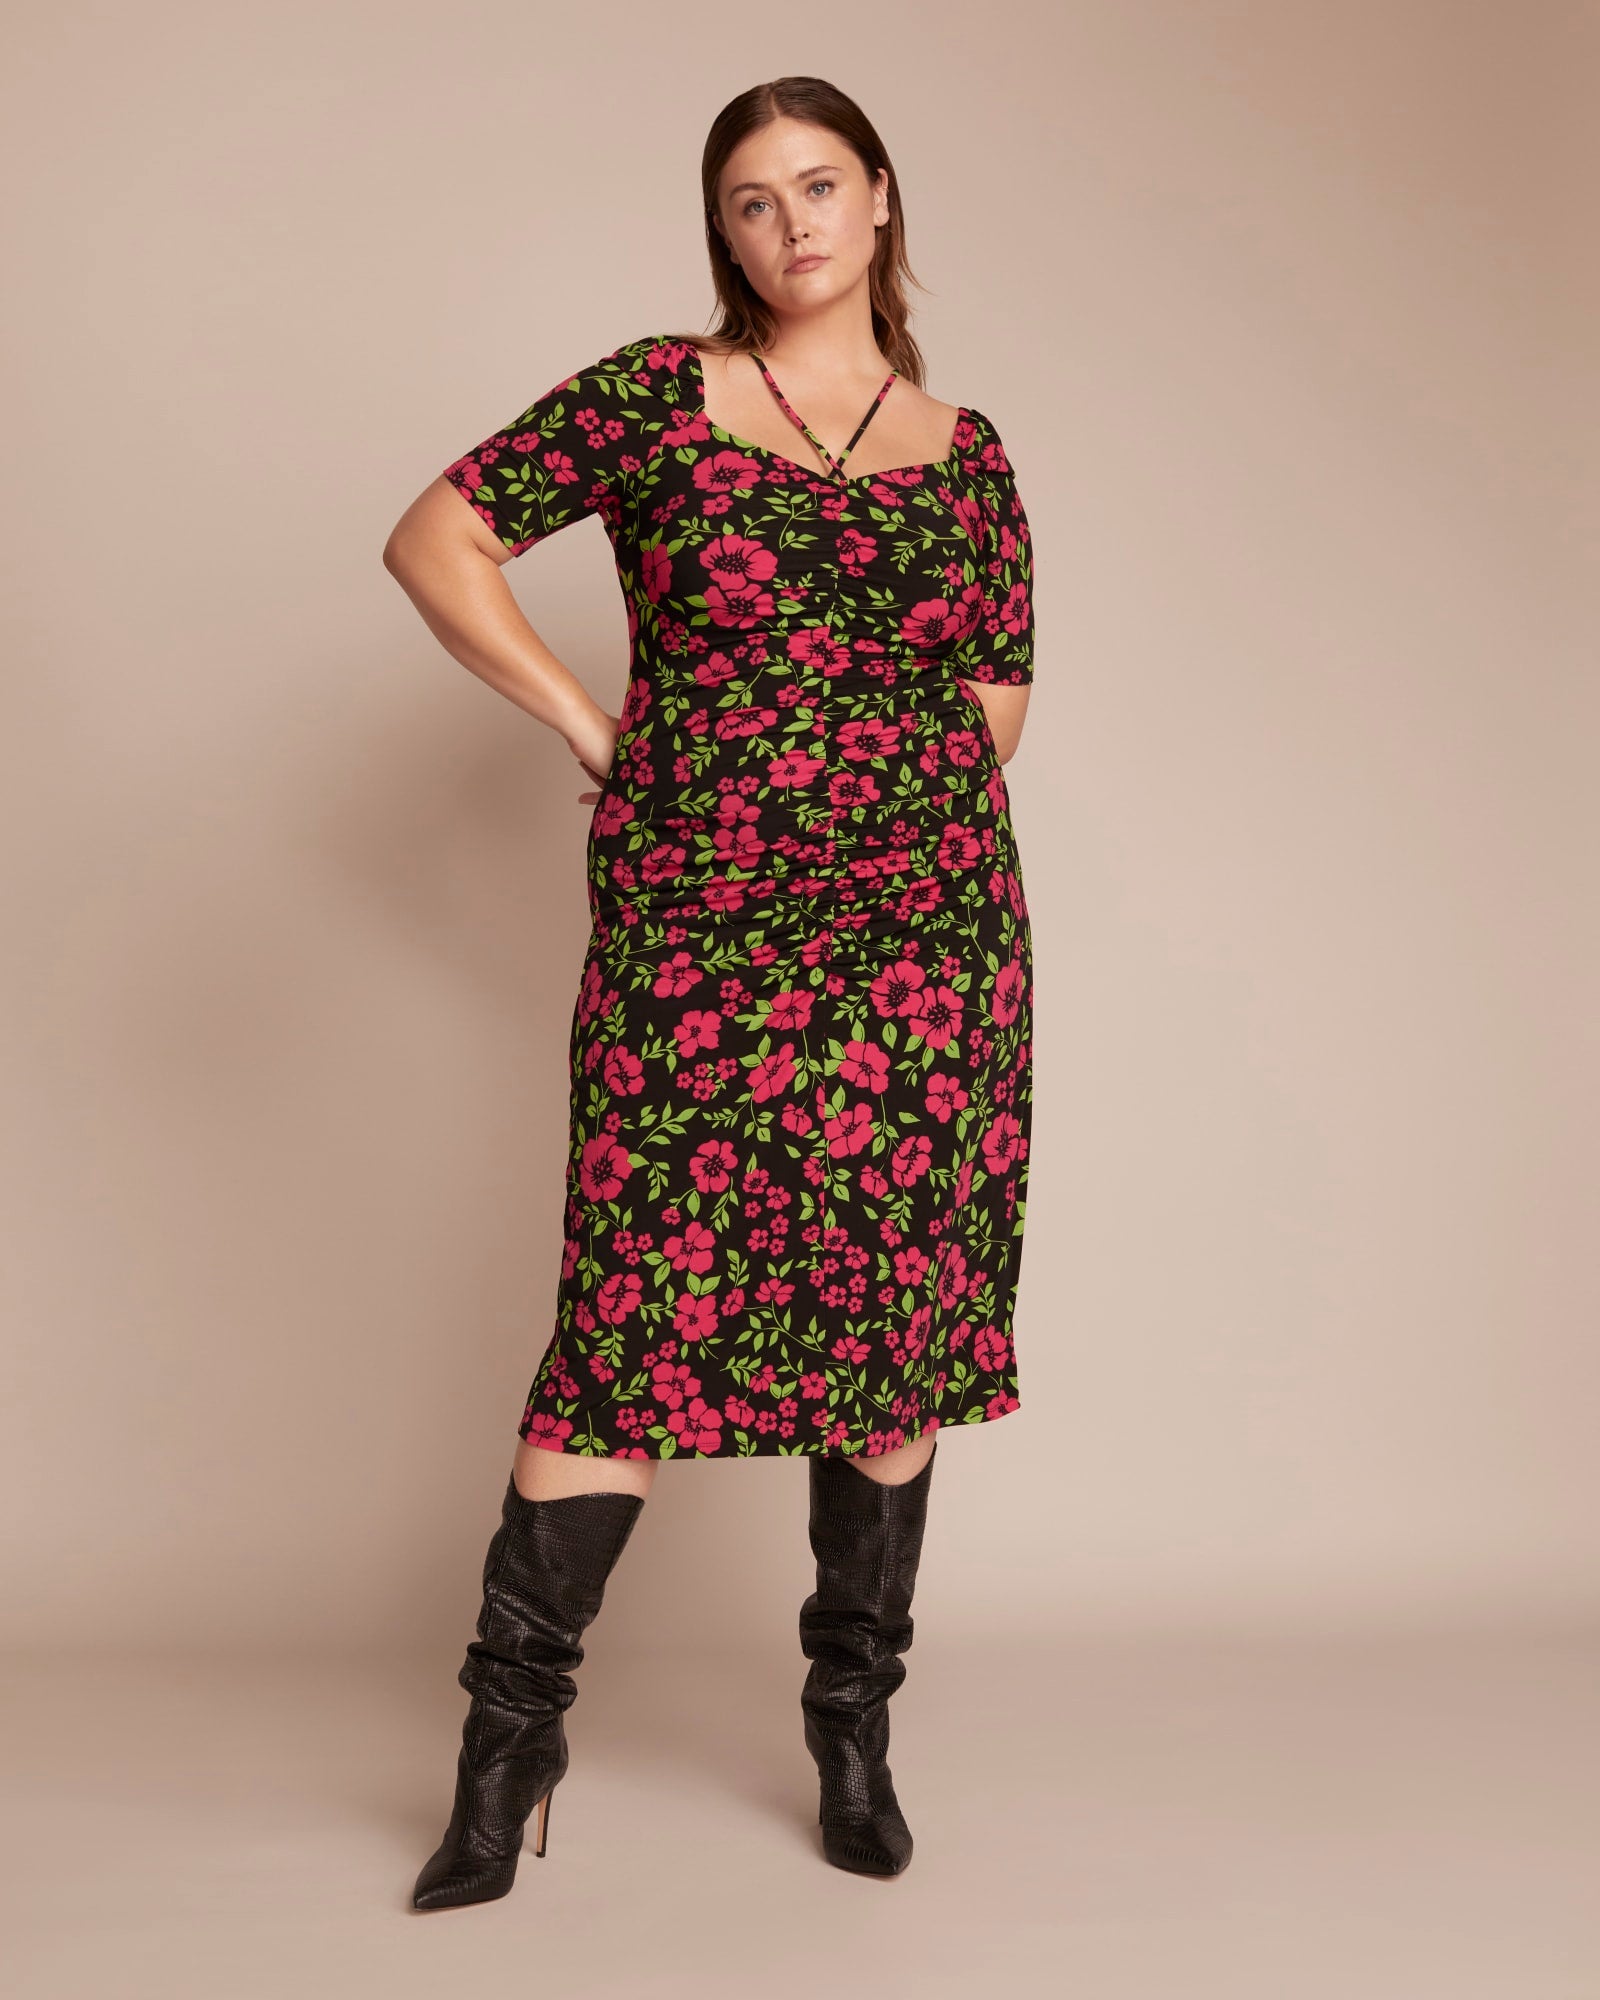 Fall Floral Dresses